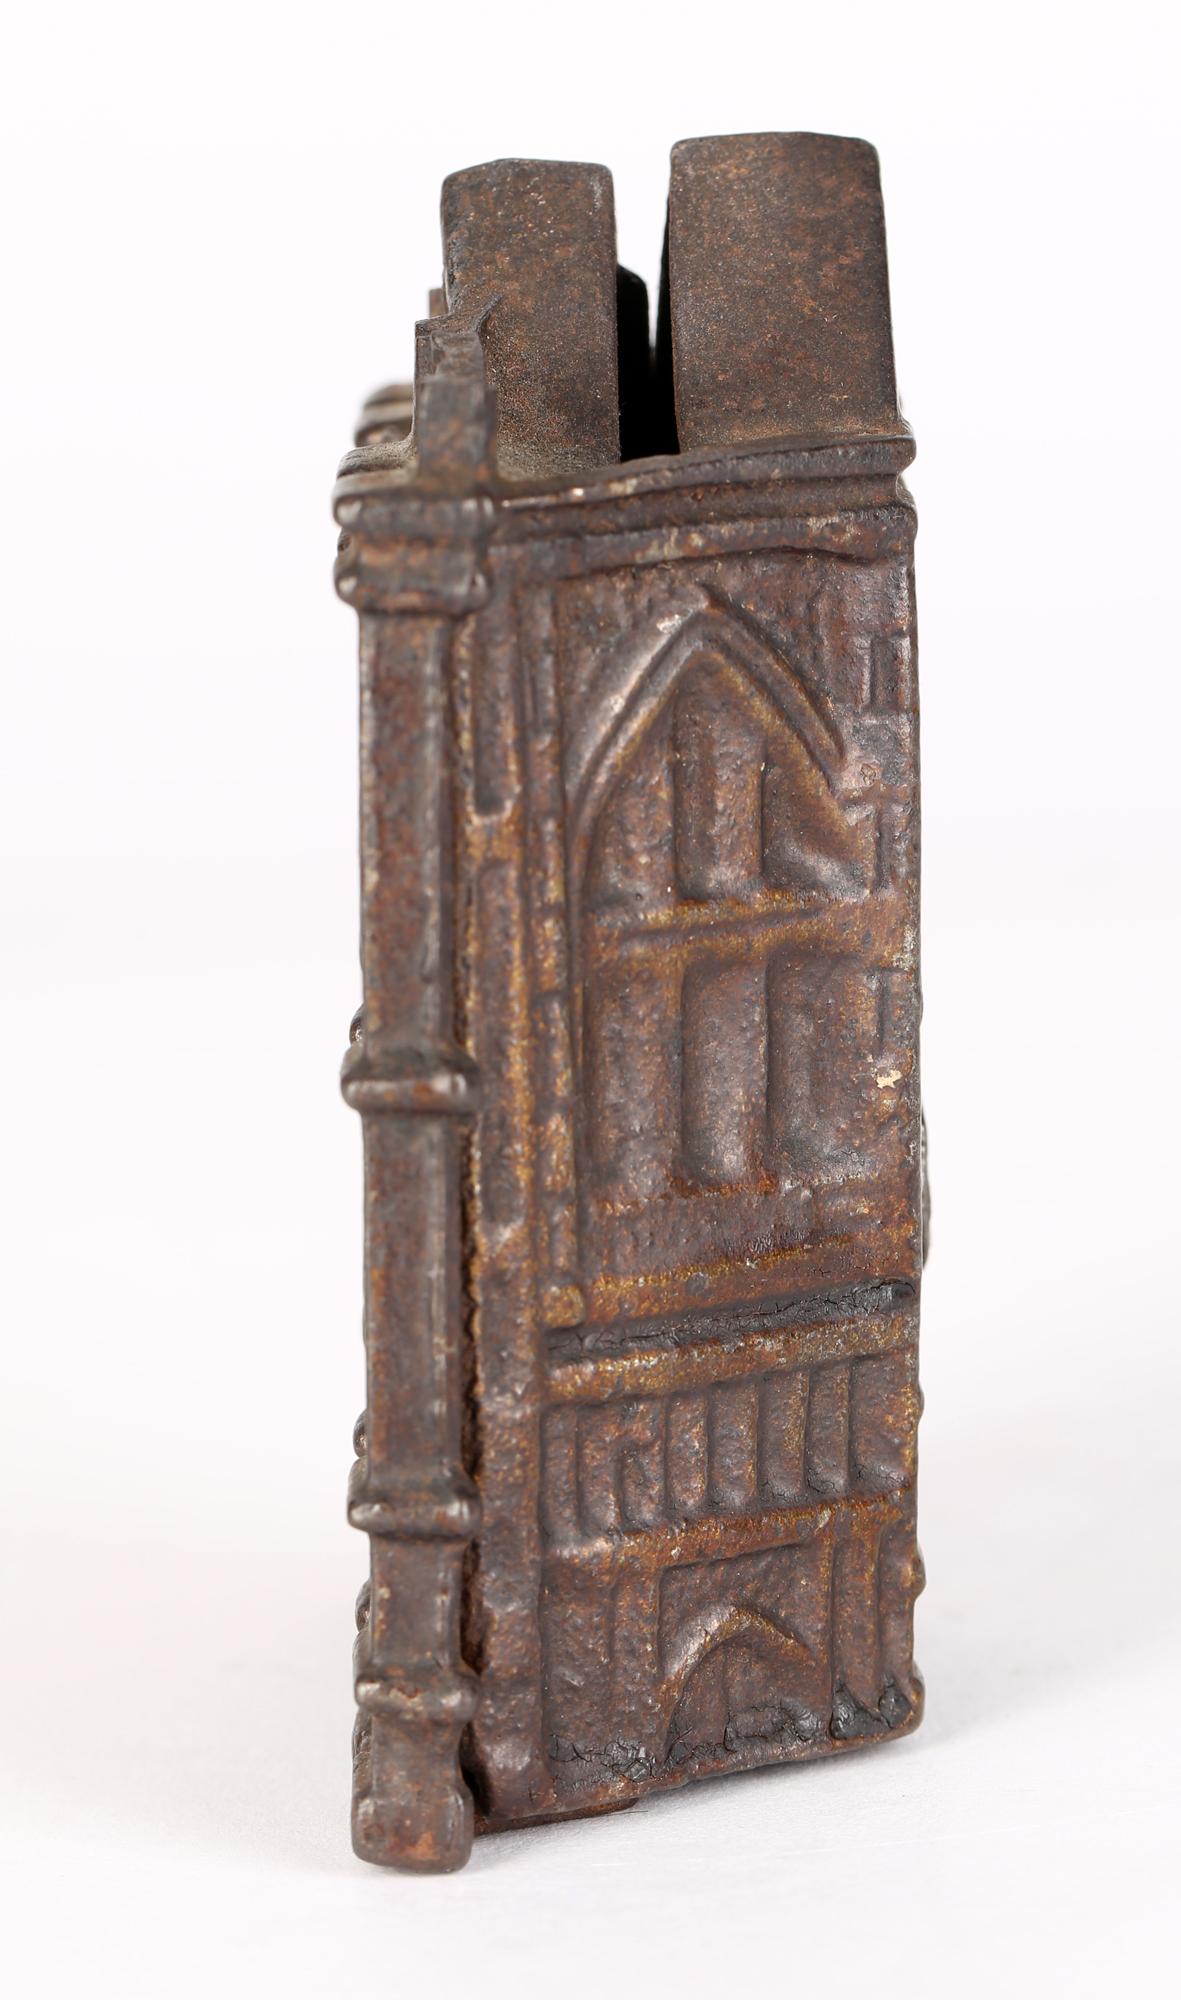 A good antique Victorian cast iron money box modelled as a Bank building dating from the 19th century. The money box is cast in two parts and simply assembled with a removable screw. The money box is formed as a tall elegant traditional building